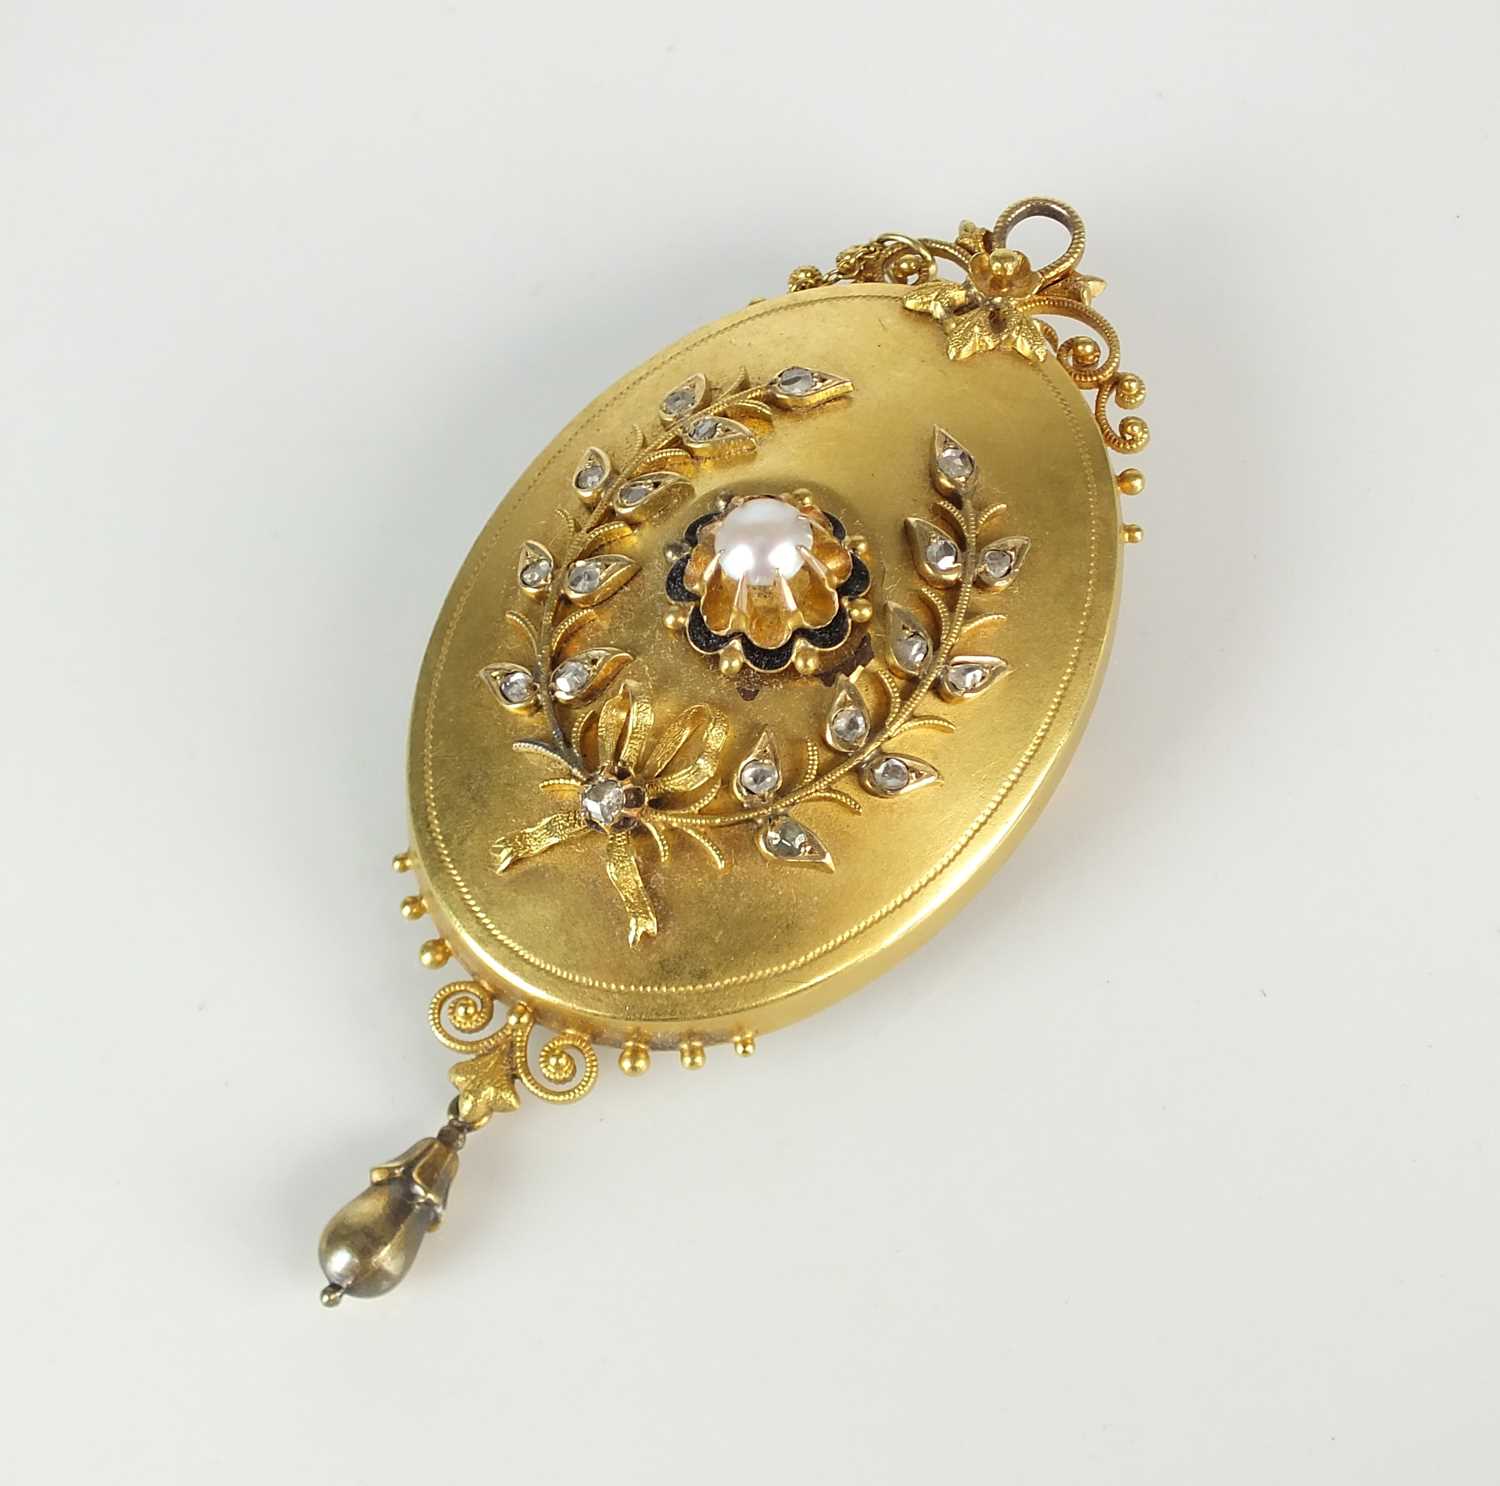 A late 19th/early 20th century diamond and pearl mourning locket / brooch